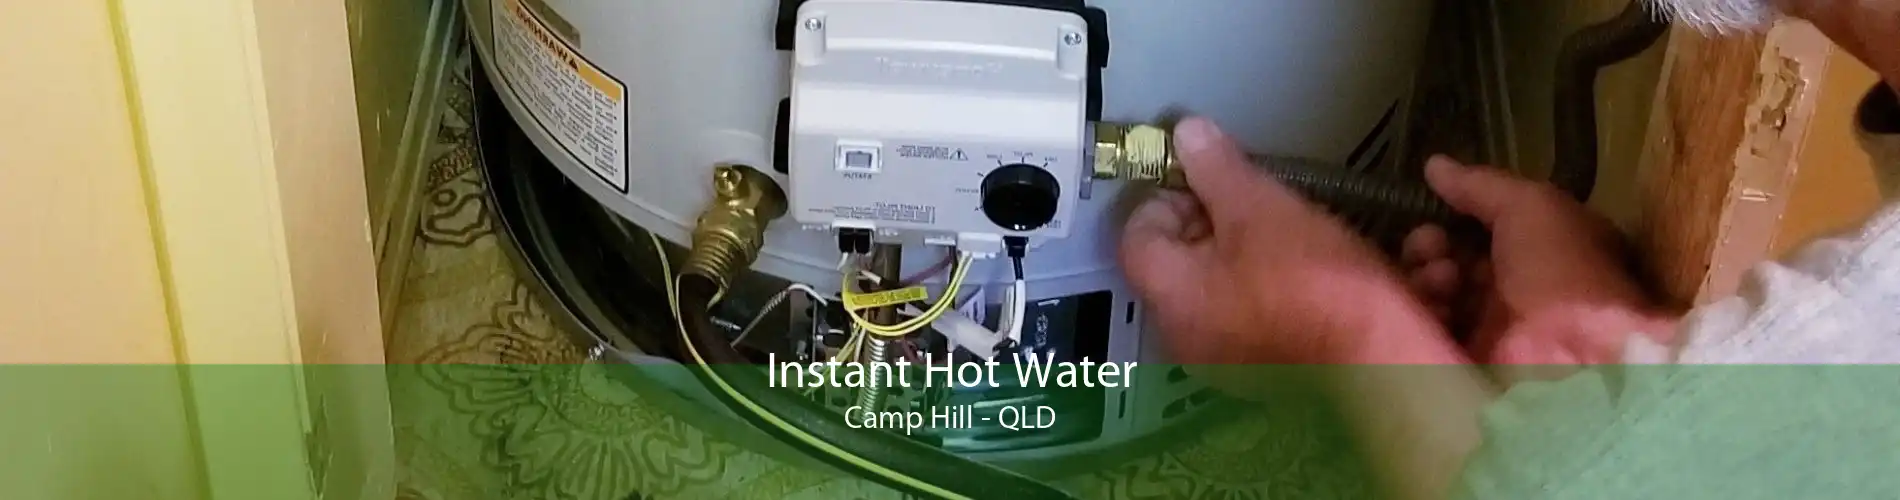 Instant Hot Water Camp Hill - QLD